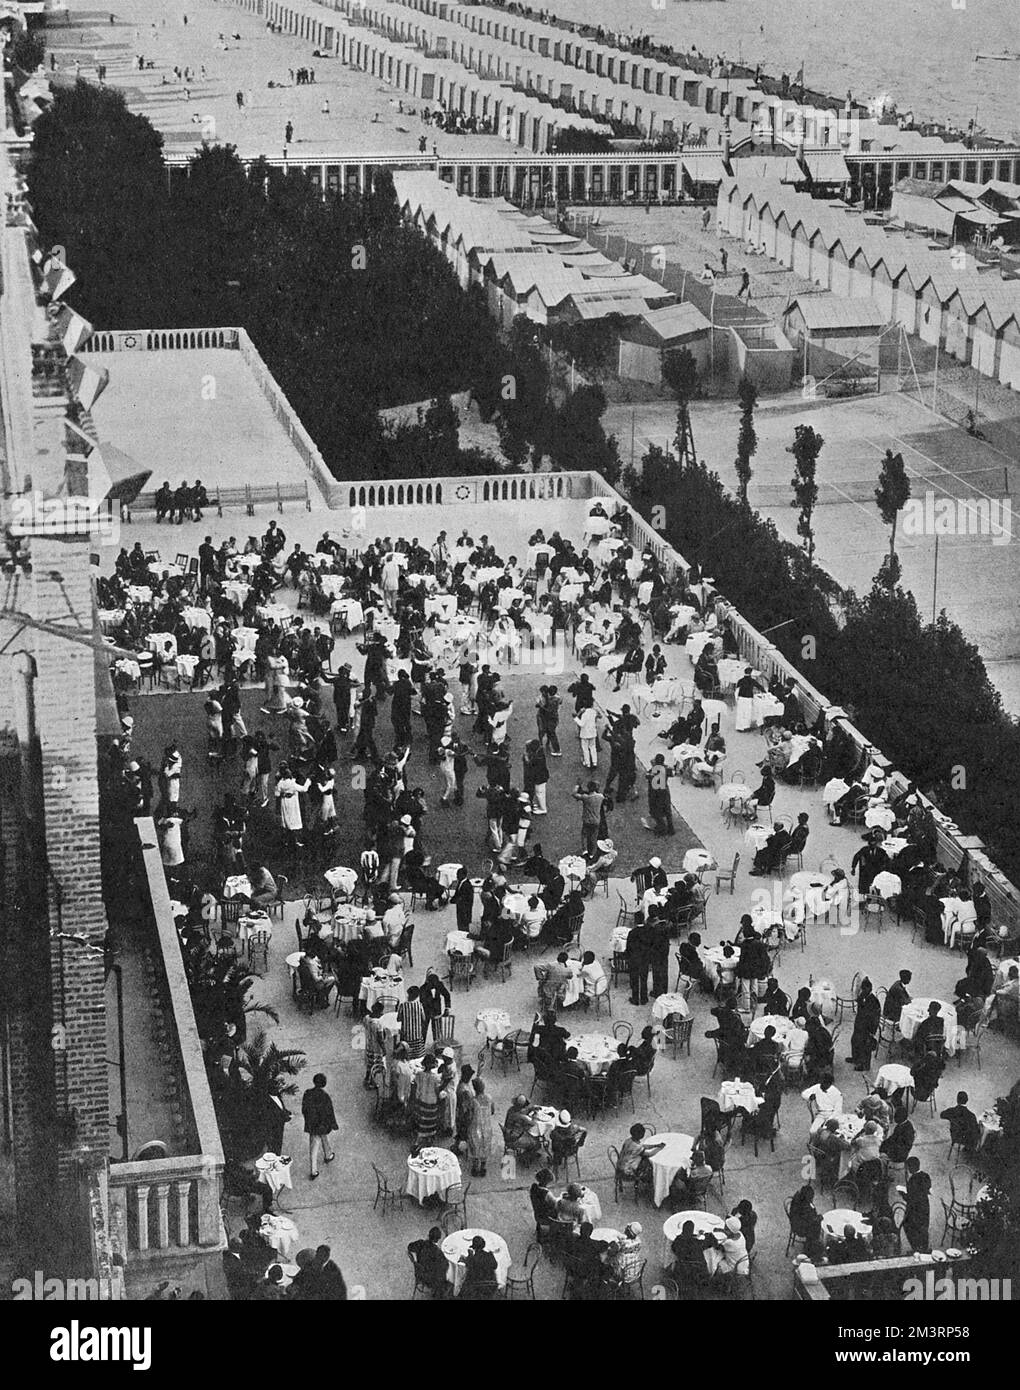 An aerial view over the Hotel Excelsior at the fashionable Venetian Lido, frequented by high society.  Photograph shows a th&#x9824;ansant in progress and waiters serving people at a number of tables.  Beyond that the beach with changing tents and beach huts in evidence.     Date: 1925 Stock Photo